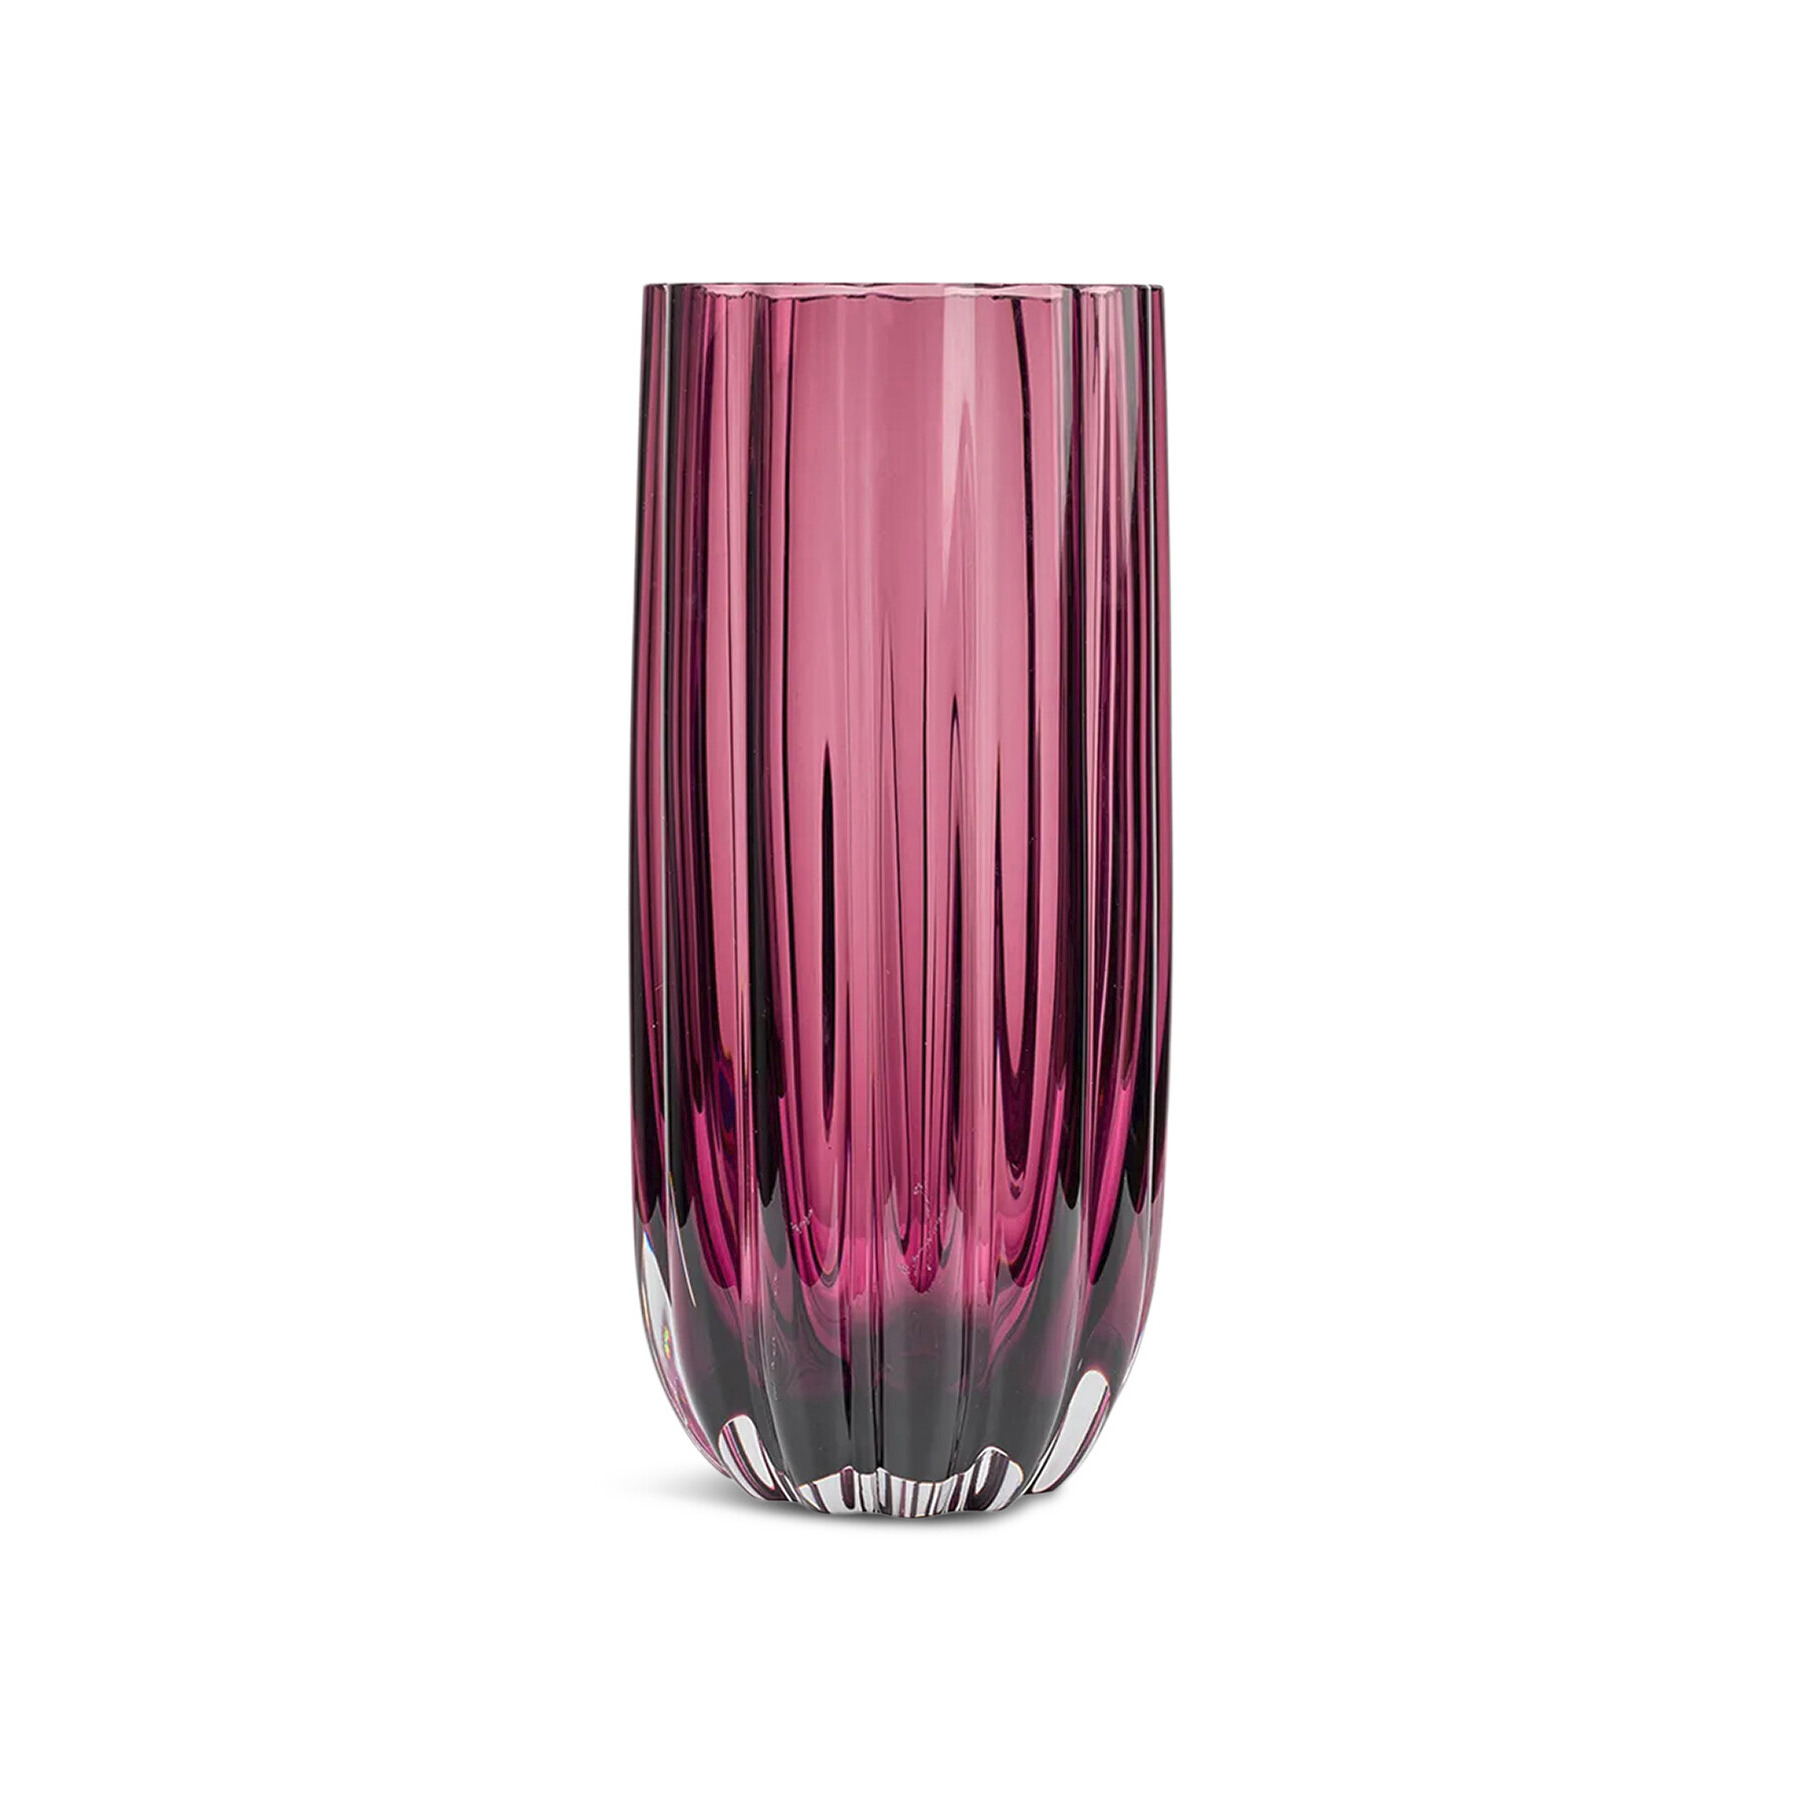 Heal's Ripple Column Vase - Size Small Pink - image 1